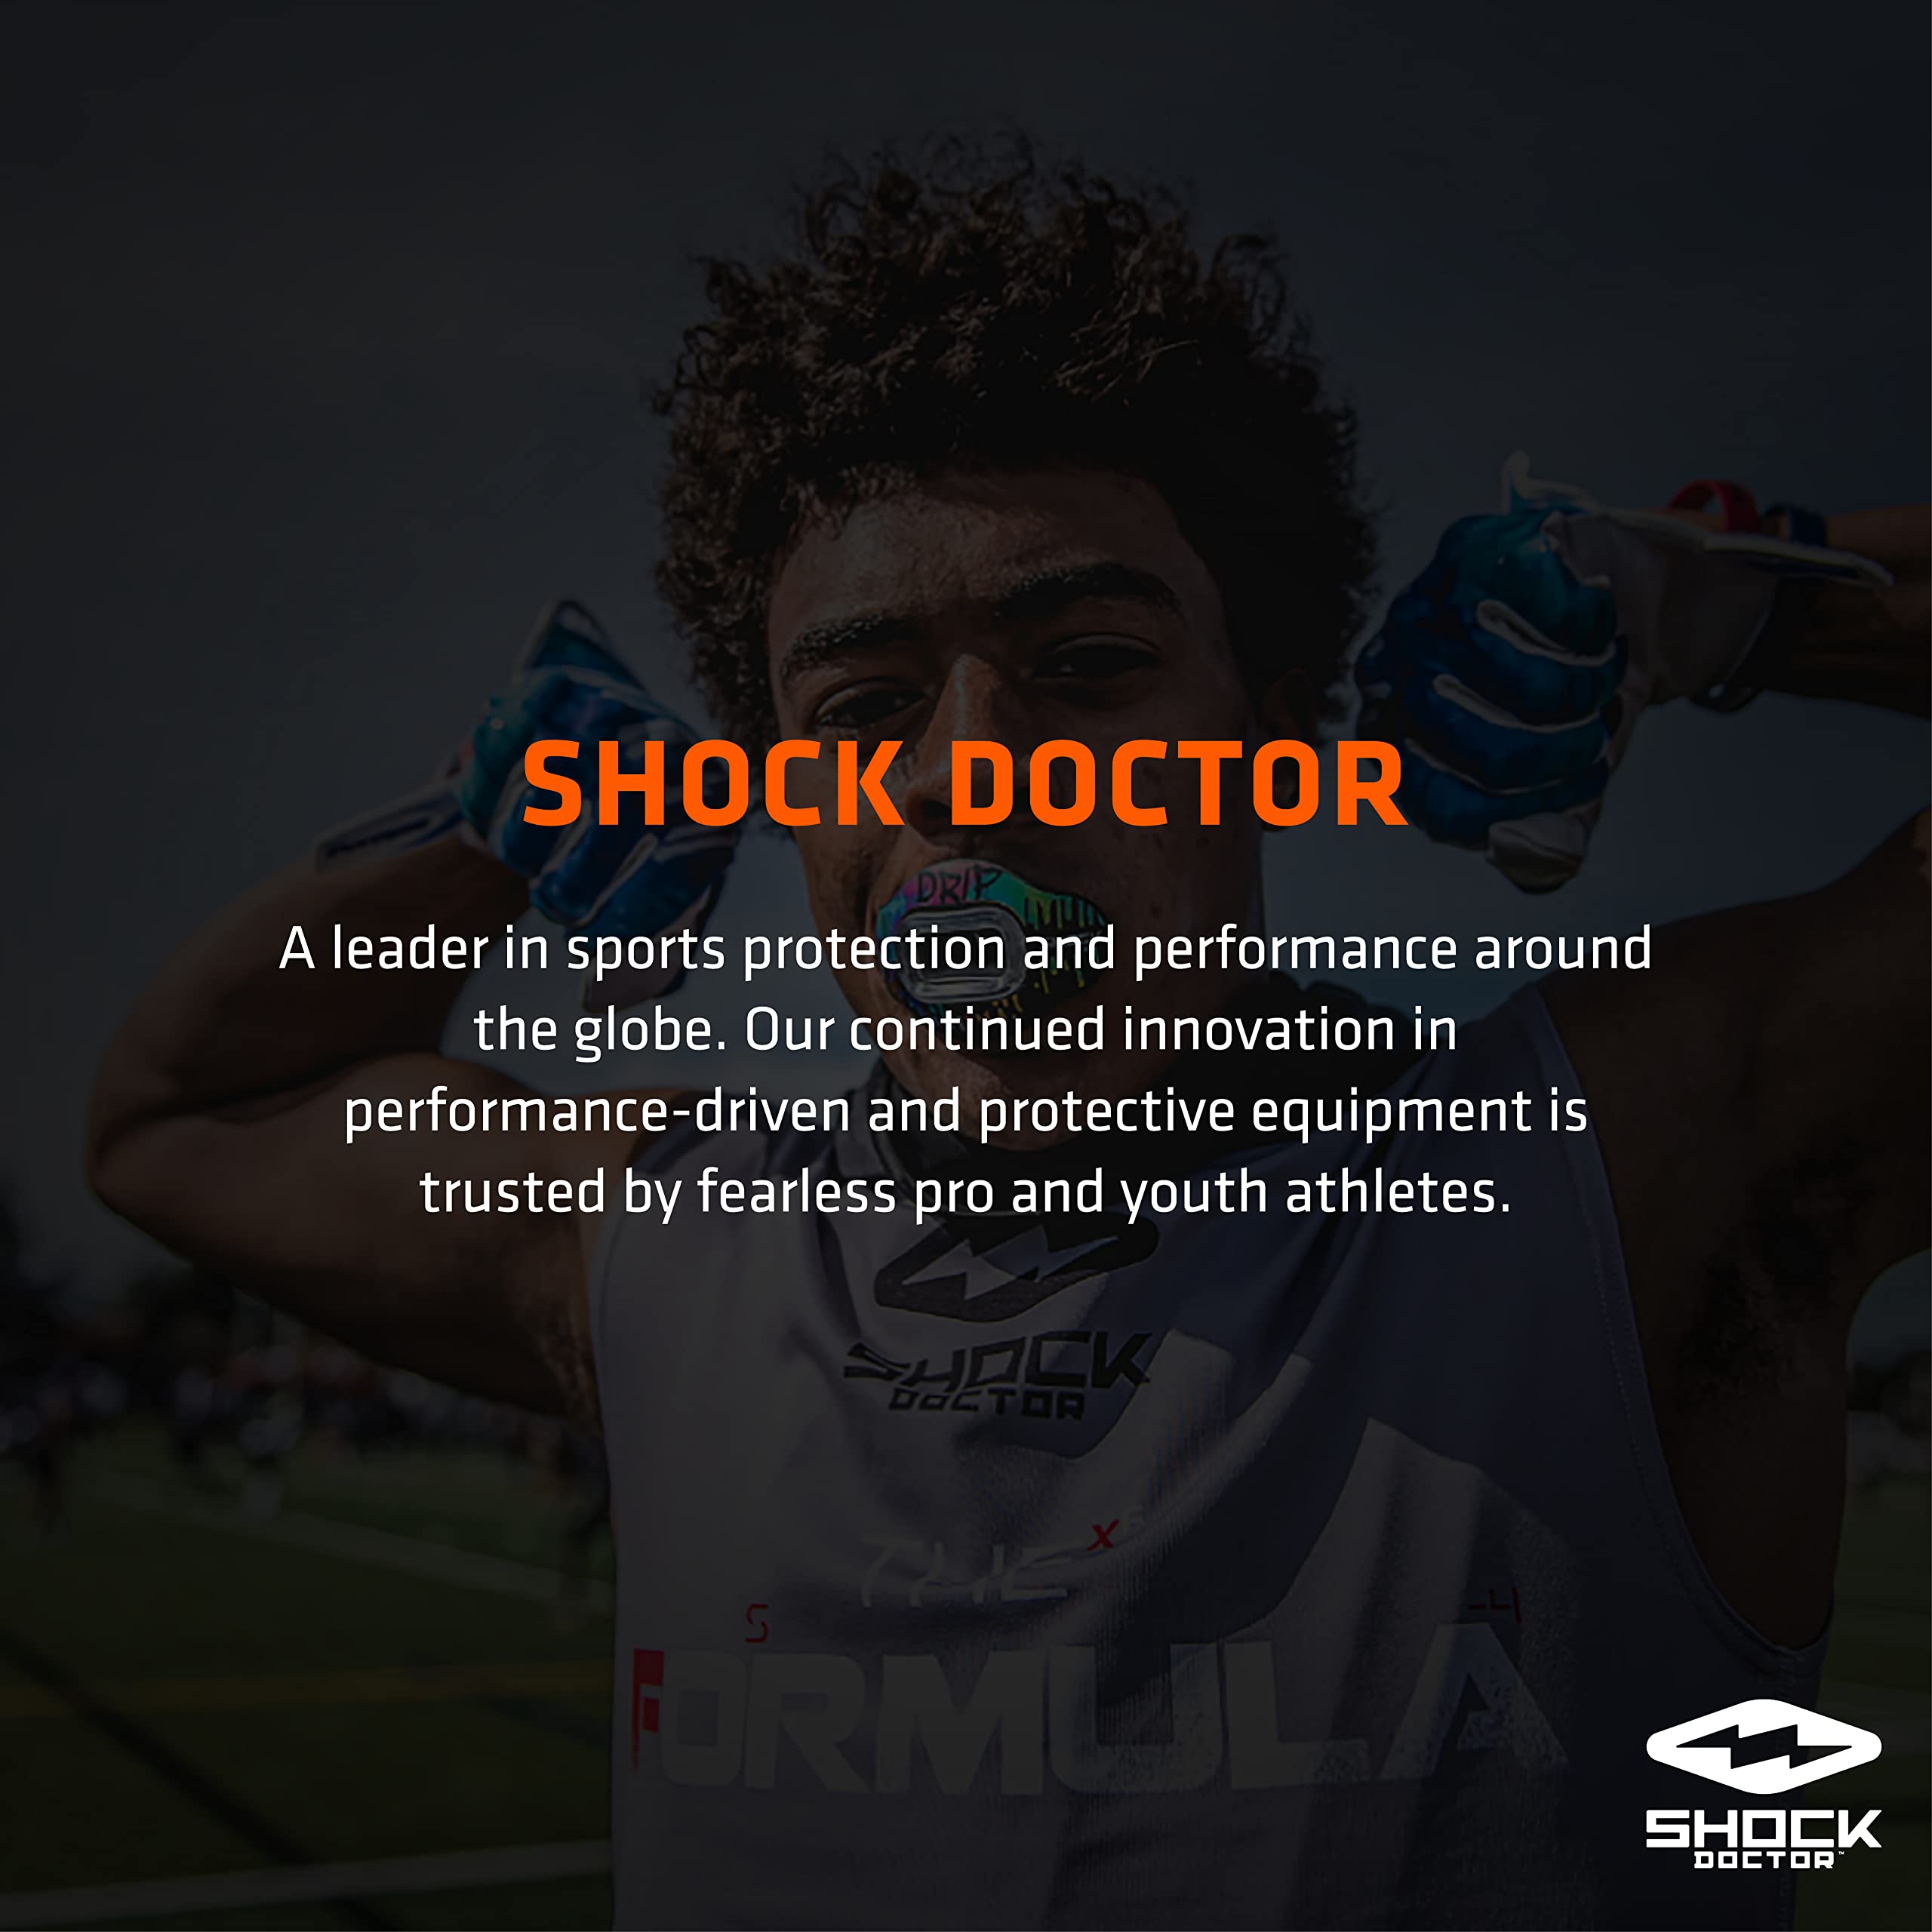 Shock Doctor Compression Shorts with Protective Bio-Flex Cup, Moisture Wicking Vented Protection, Youth Size